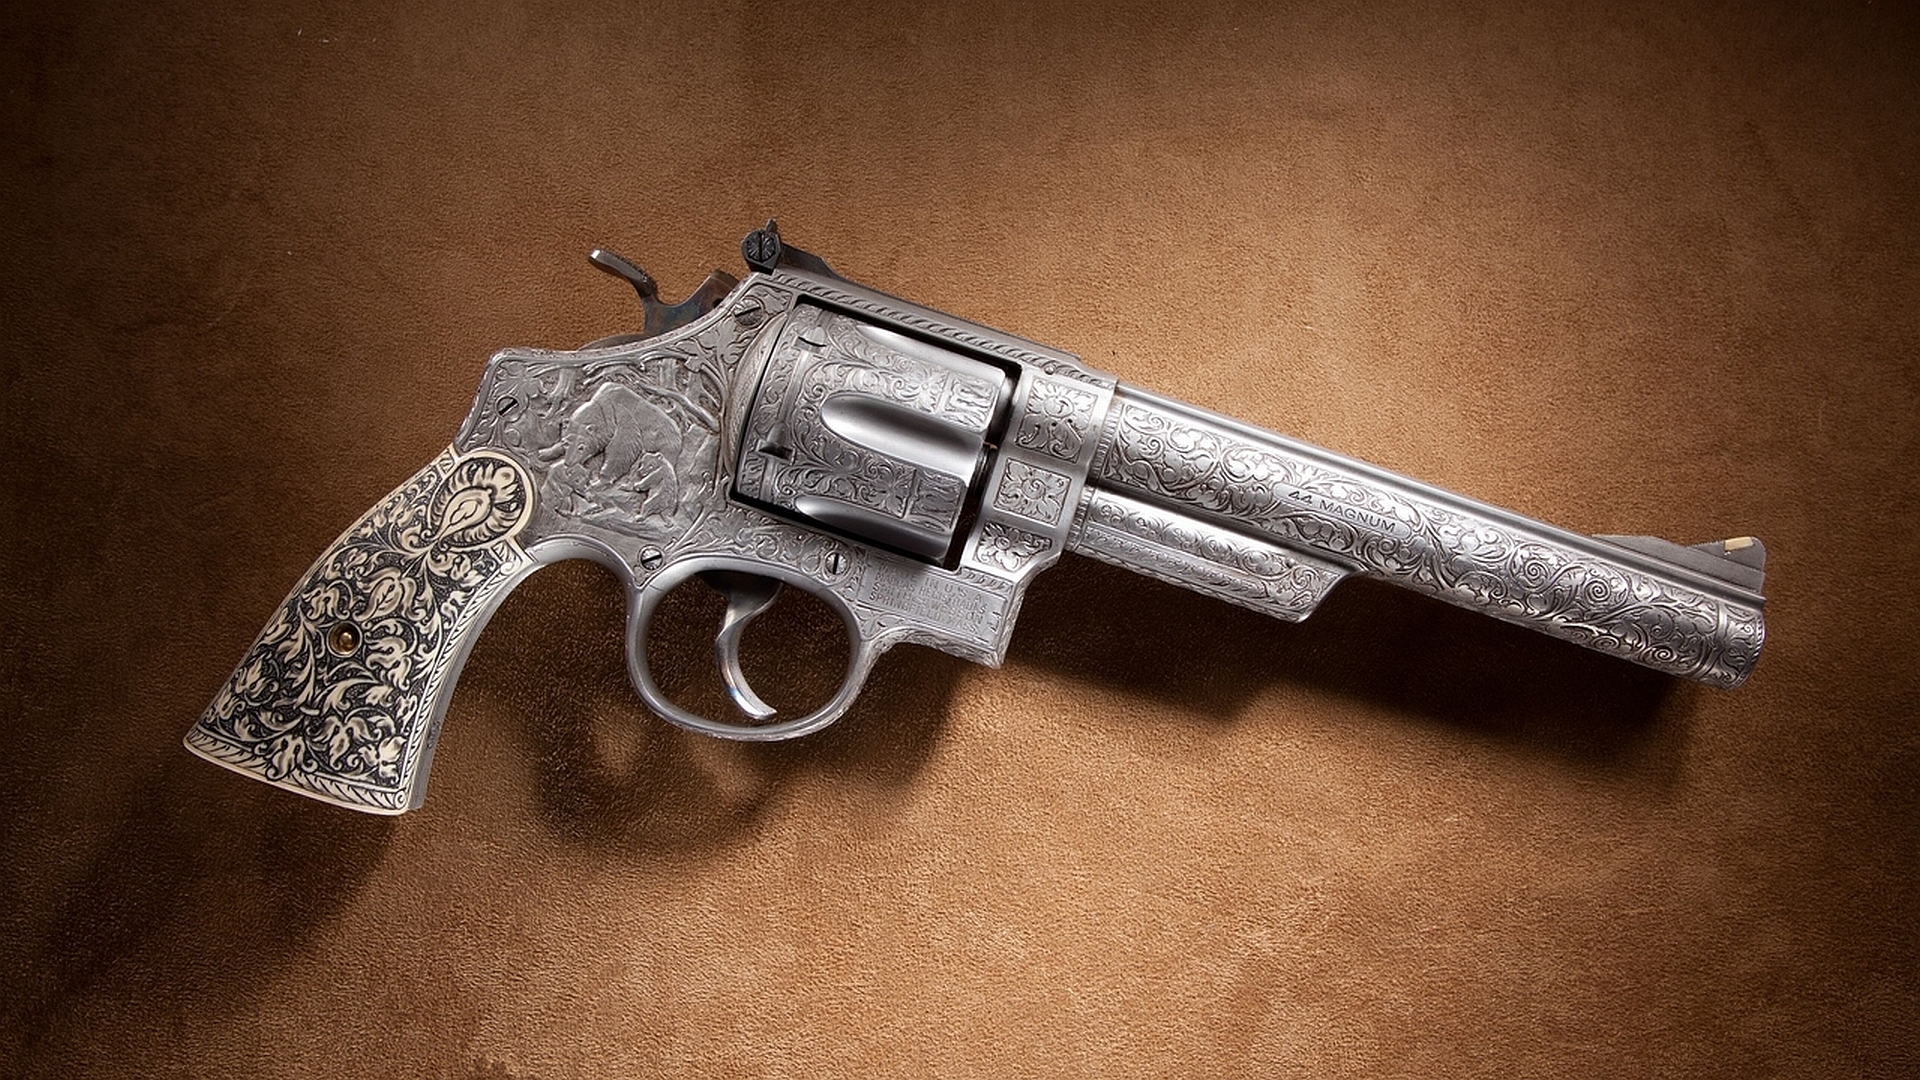 Revolver with 44 magnum ammunition. A powerful man-made weapon ready for action.